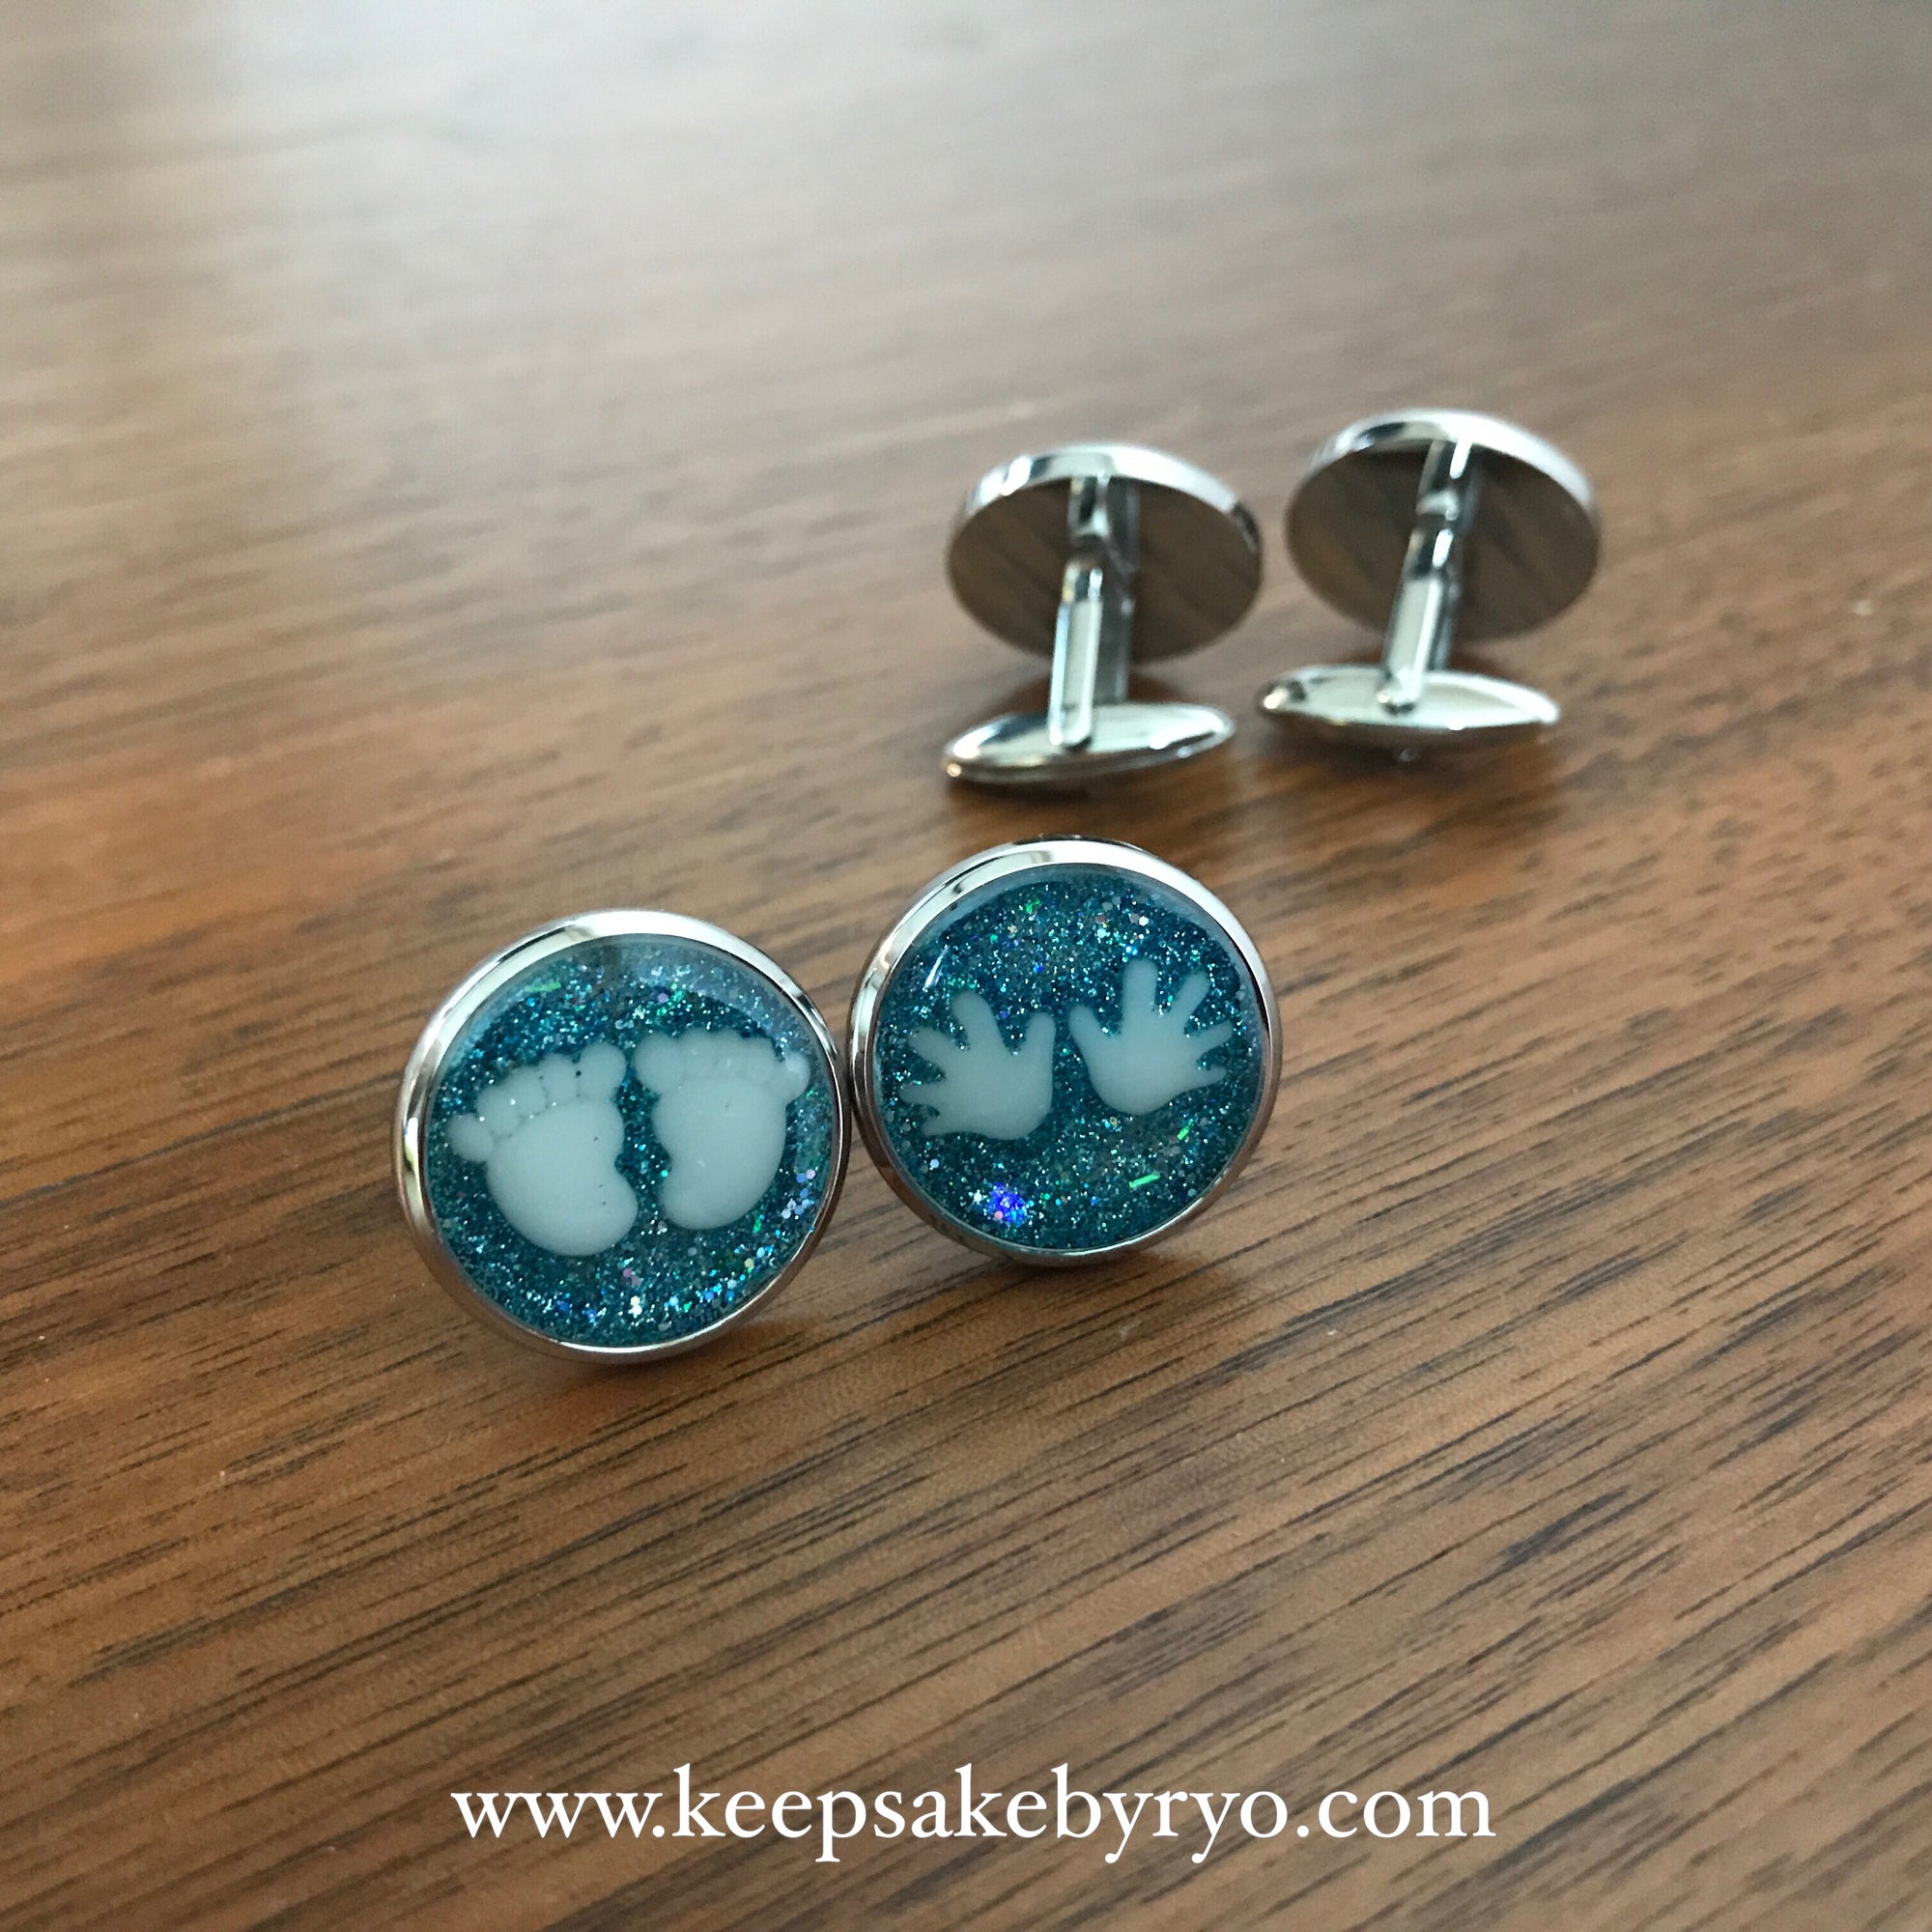 CUFFLINKS WITH BABY PALM AND/OR FOOT PRINTS